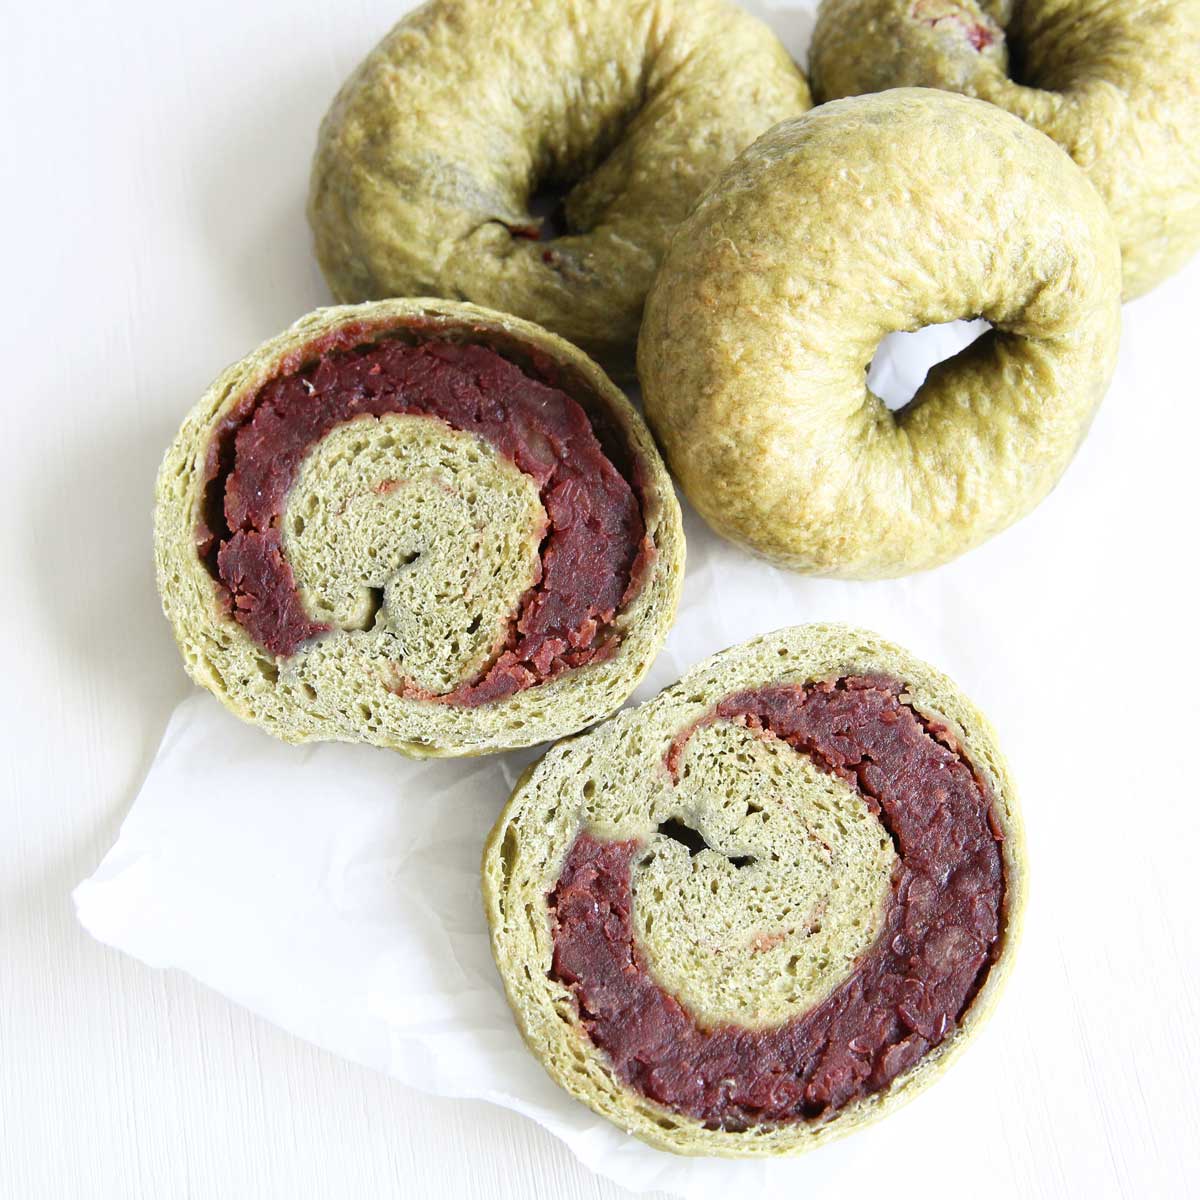 Homemade Applesauce Matcha Bagels with Red Bean Paste Filling - Green Tea Snow Skin